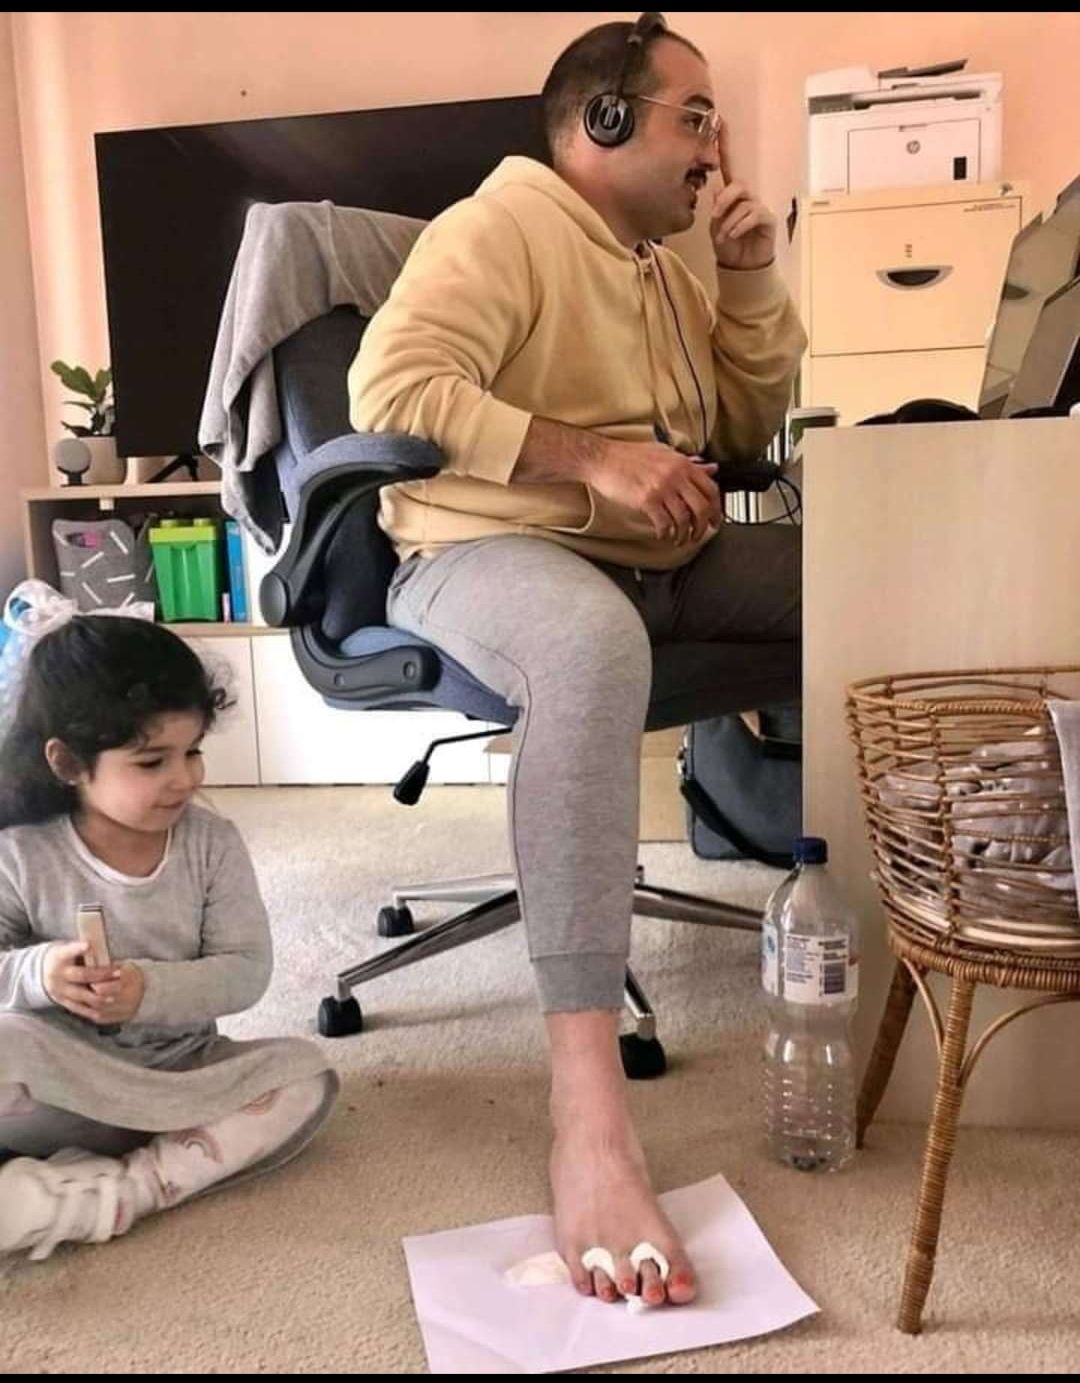 He let his daughter paint his toenails so he can finish the zoom meeting in peace.